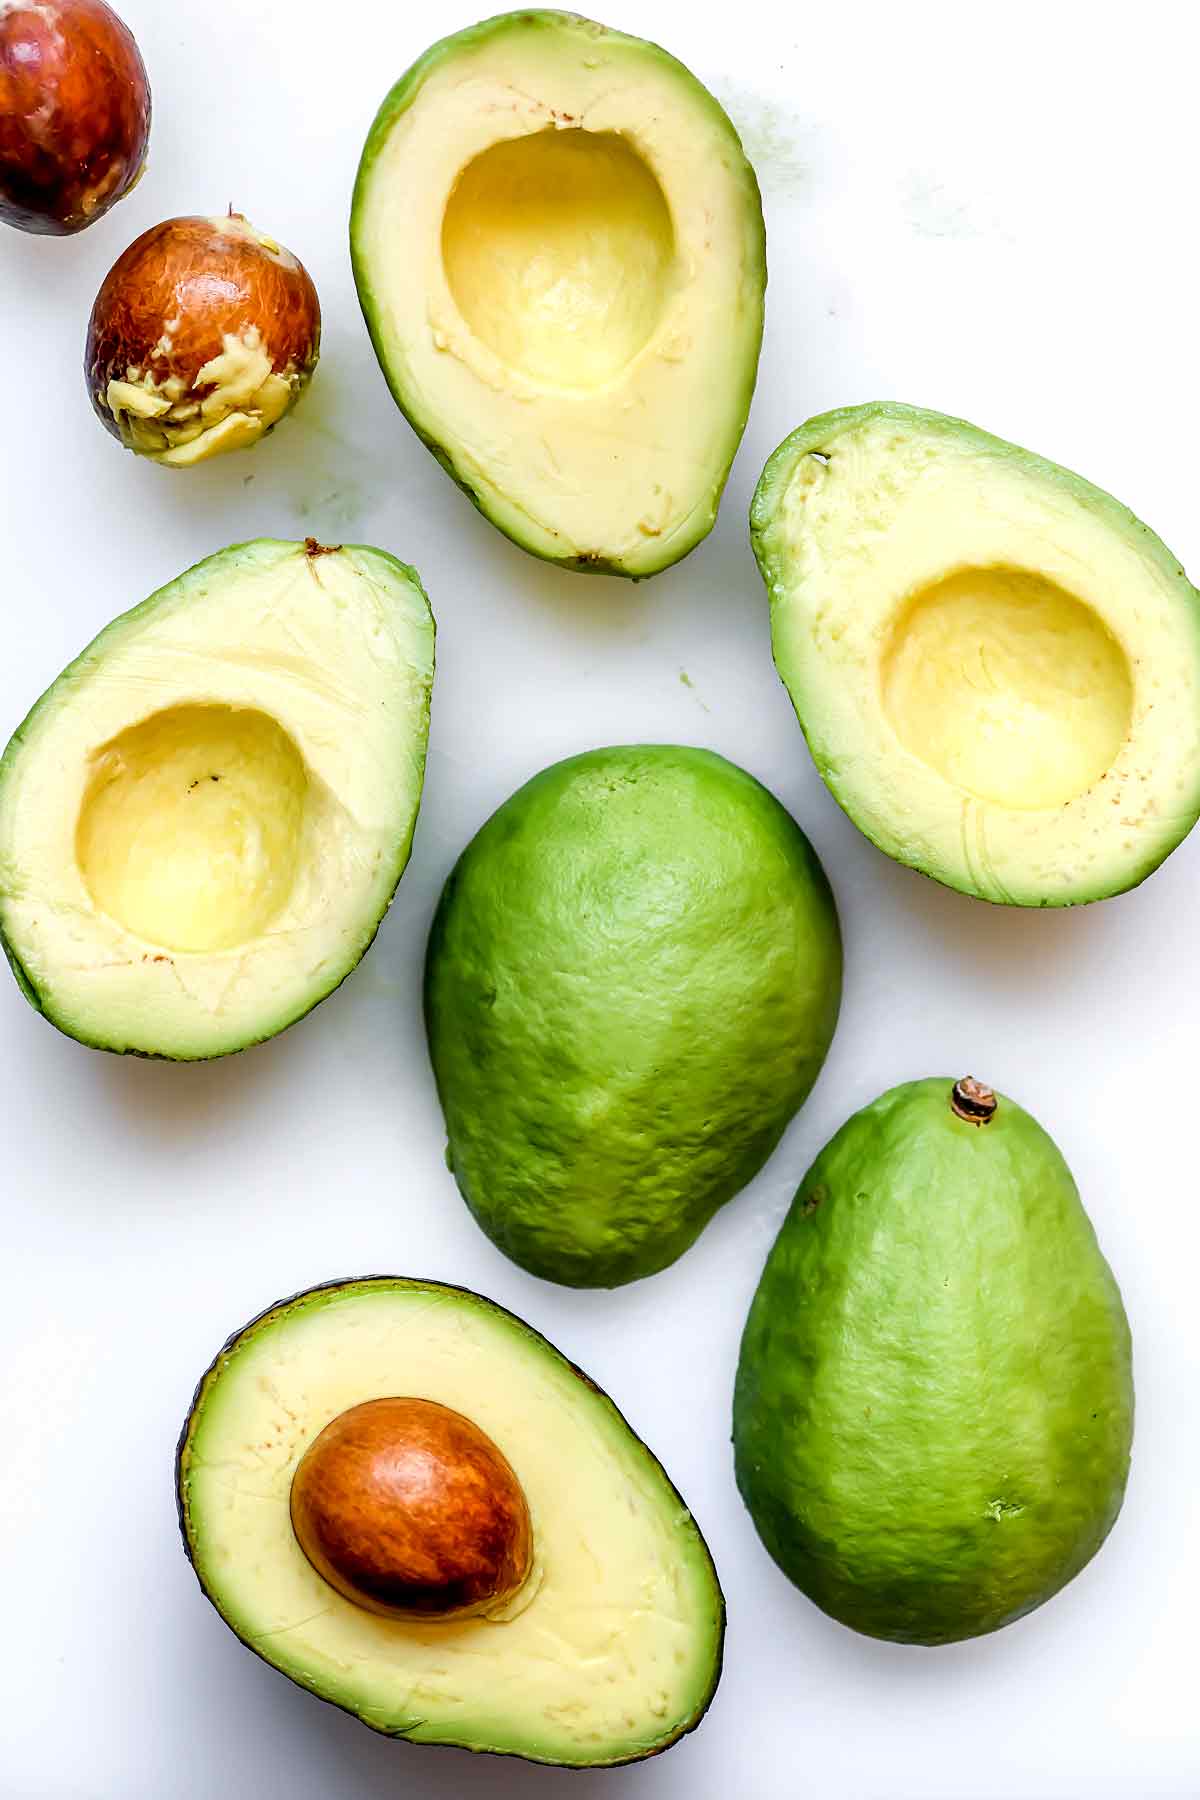 Avocado -The Best Foods for Clearer Skin